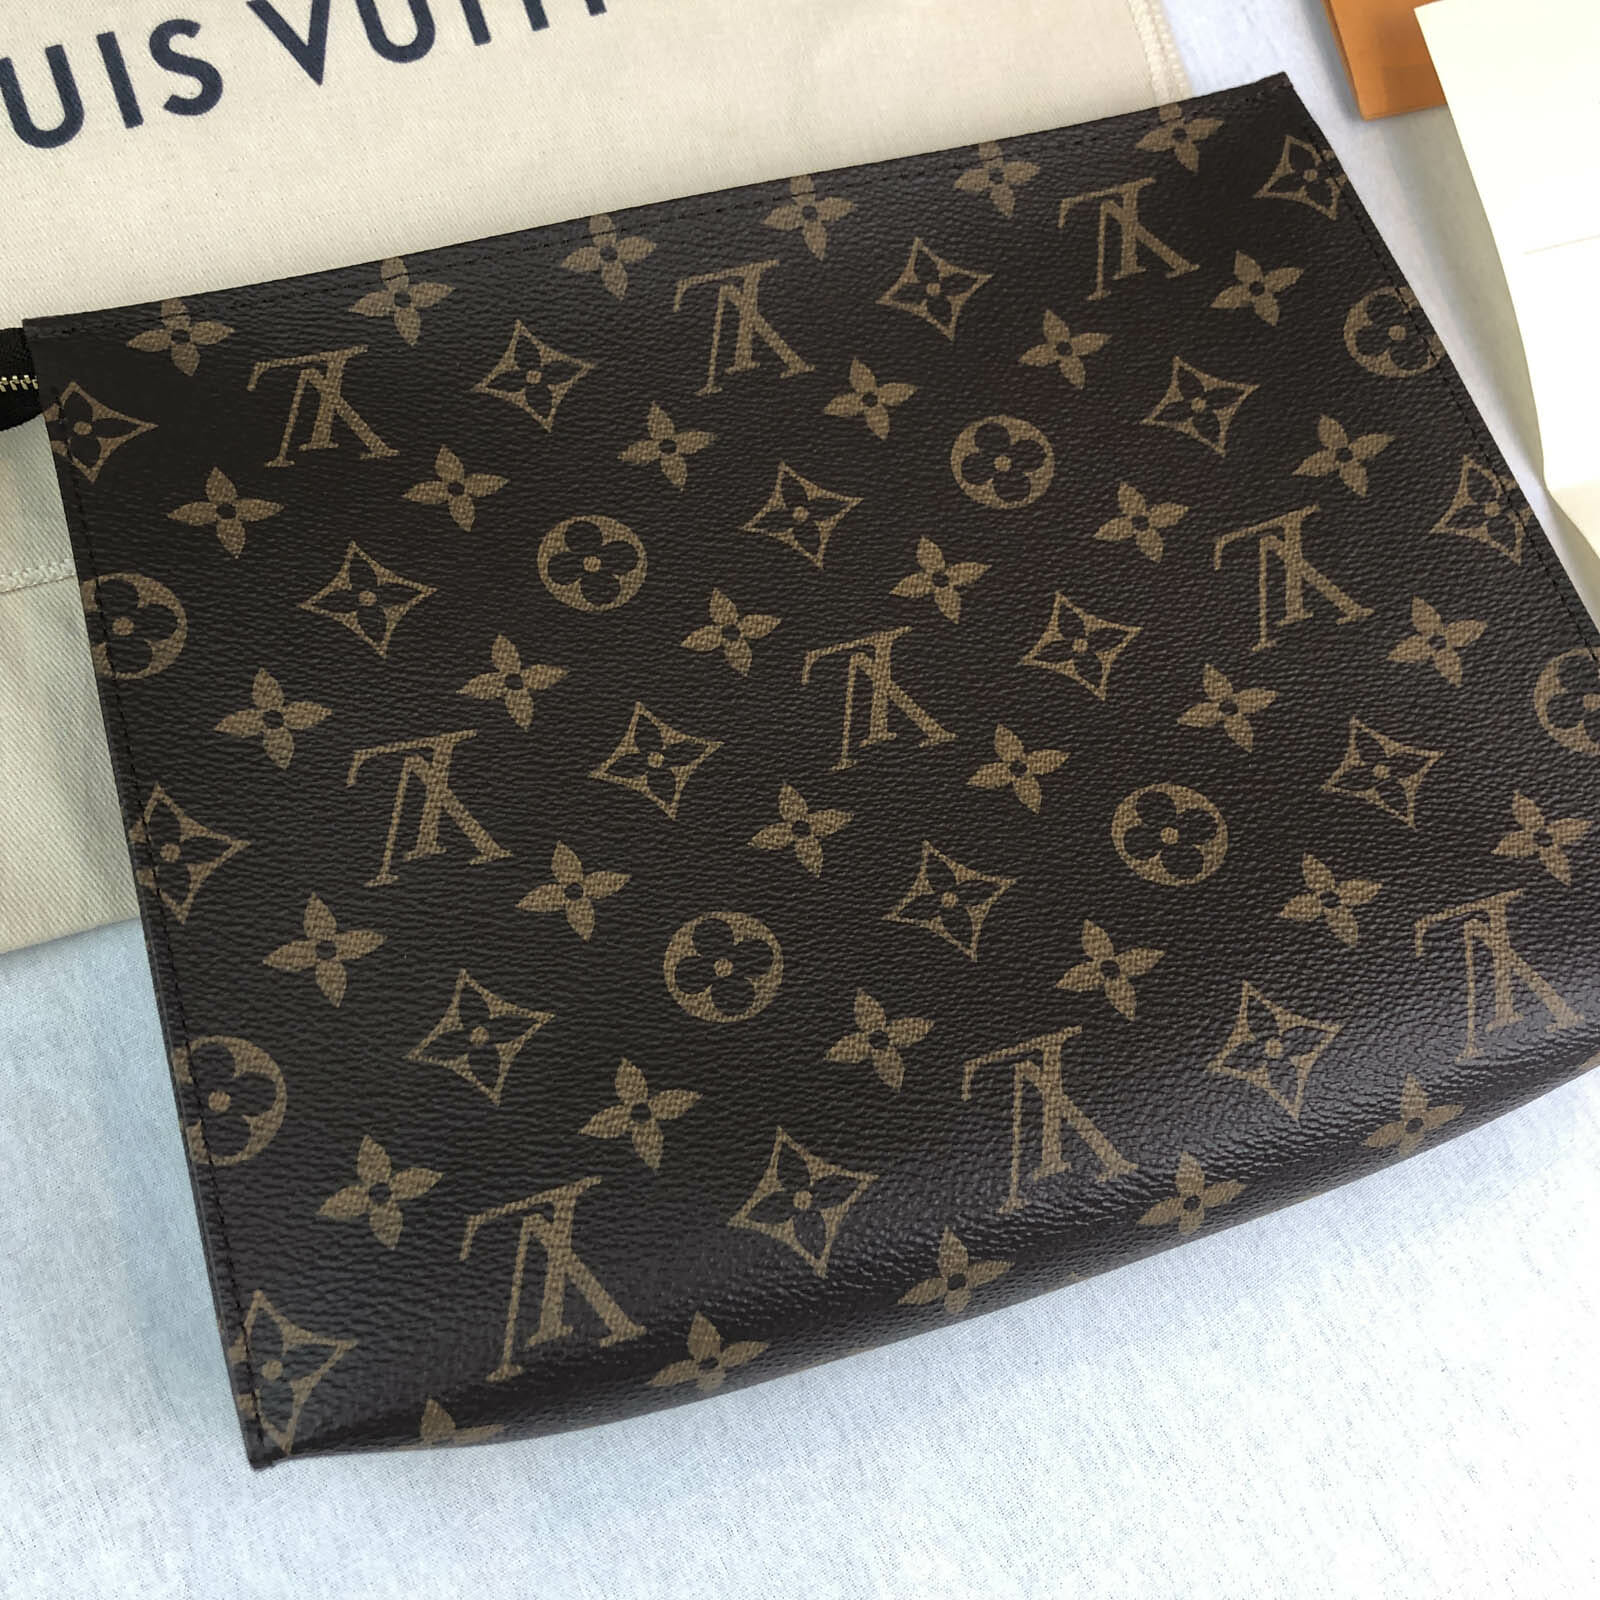 Louis+Vuitton+Toiletry+Pouch+19+Brown+Canvas+Monogram+Coated for